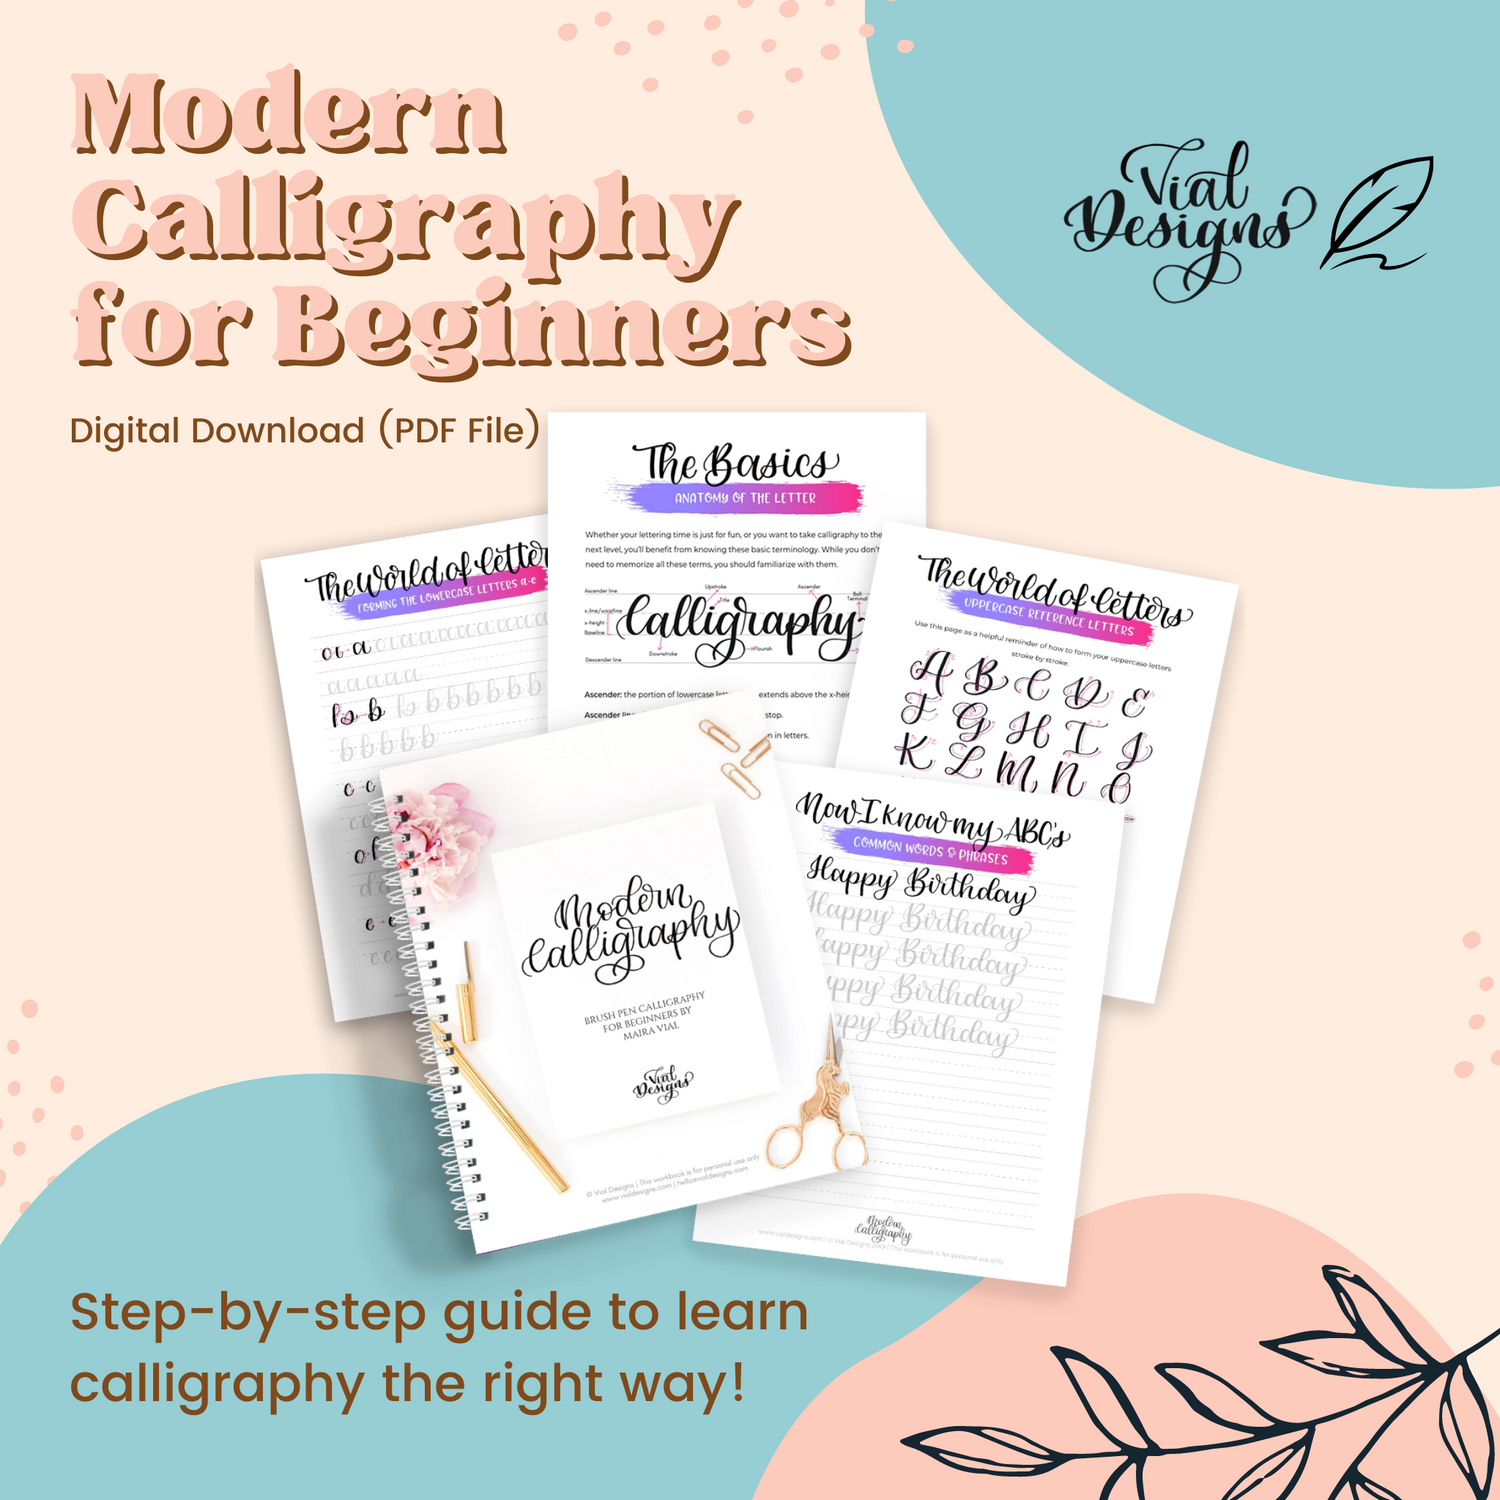 How to Learn Calligraphy: The Complete Beginner's Guide